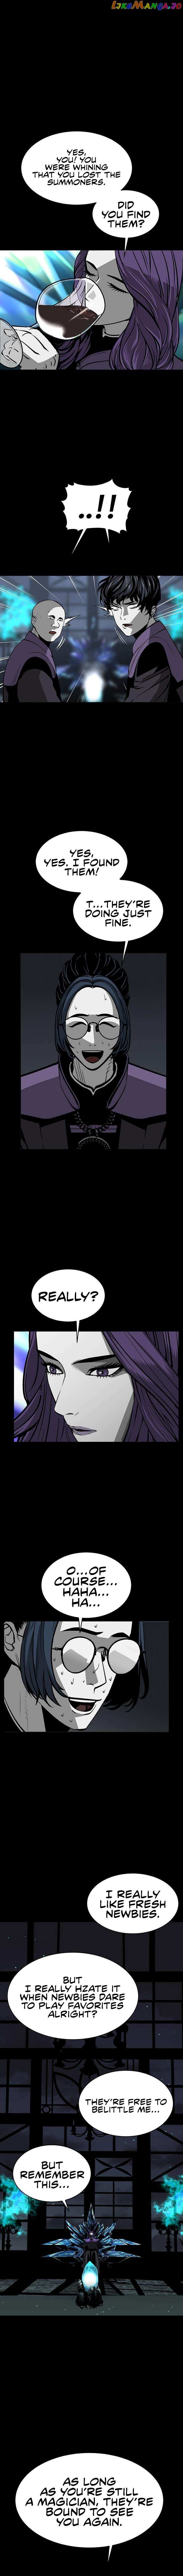 The Protagonists Hidden Strength Chapter 17 - page 5